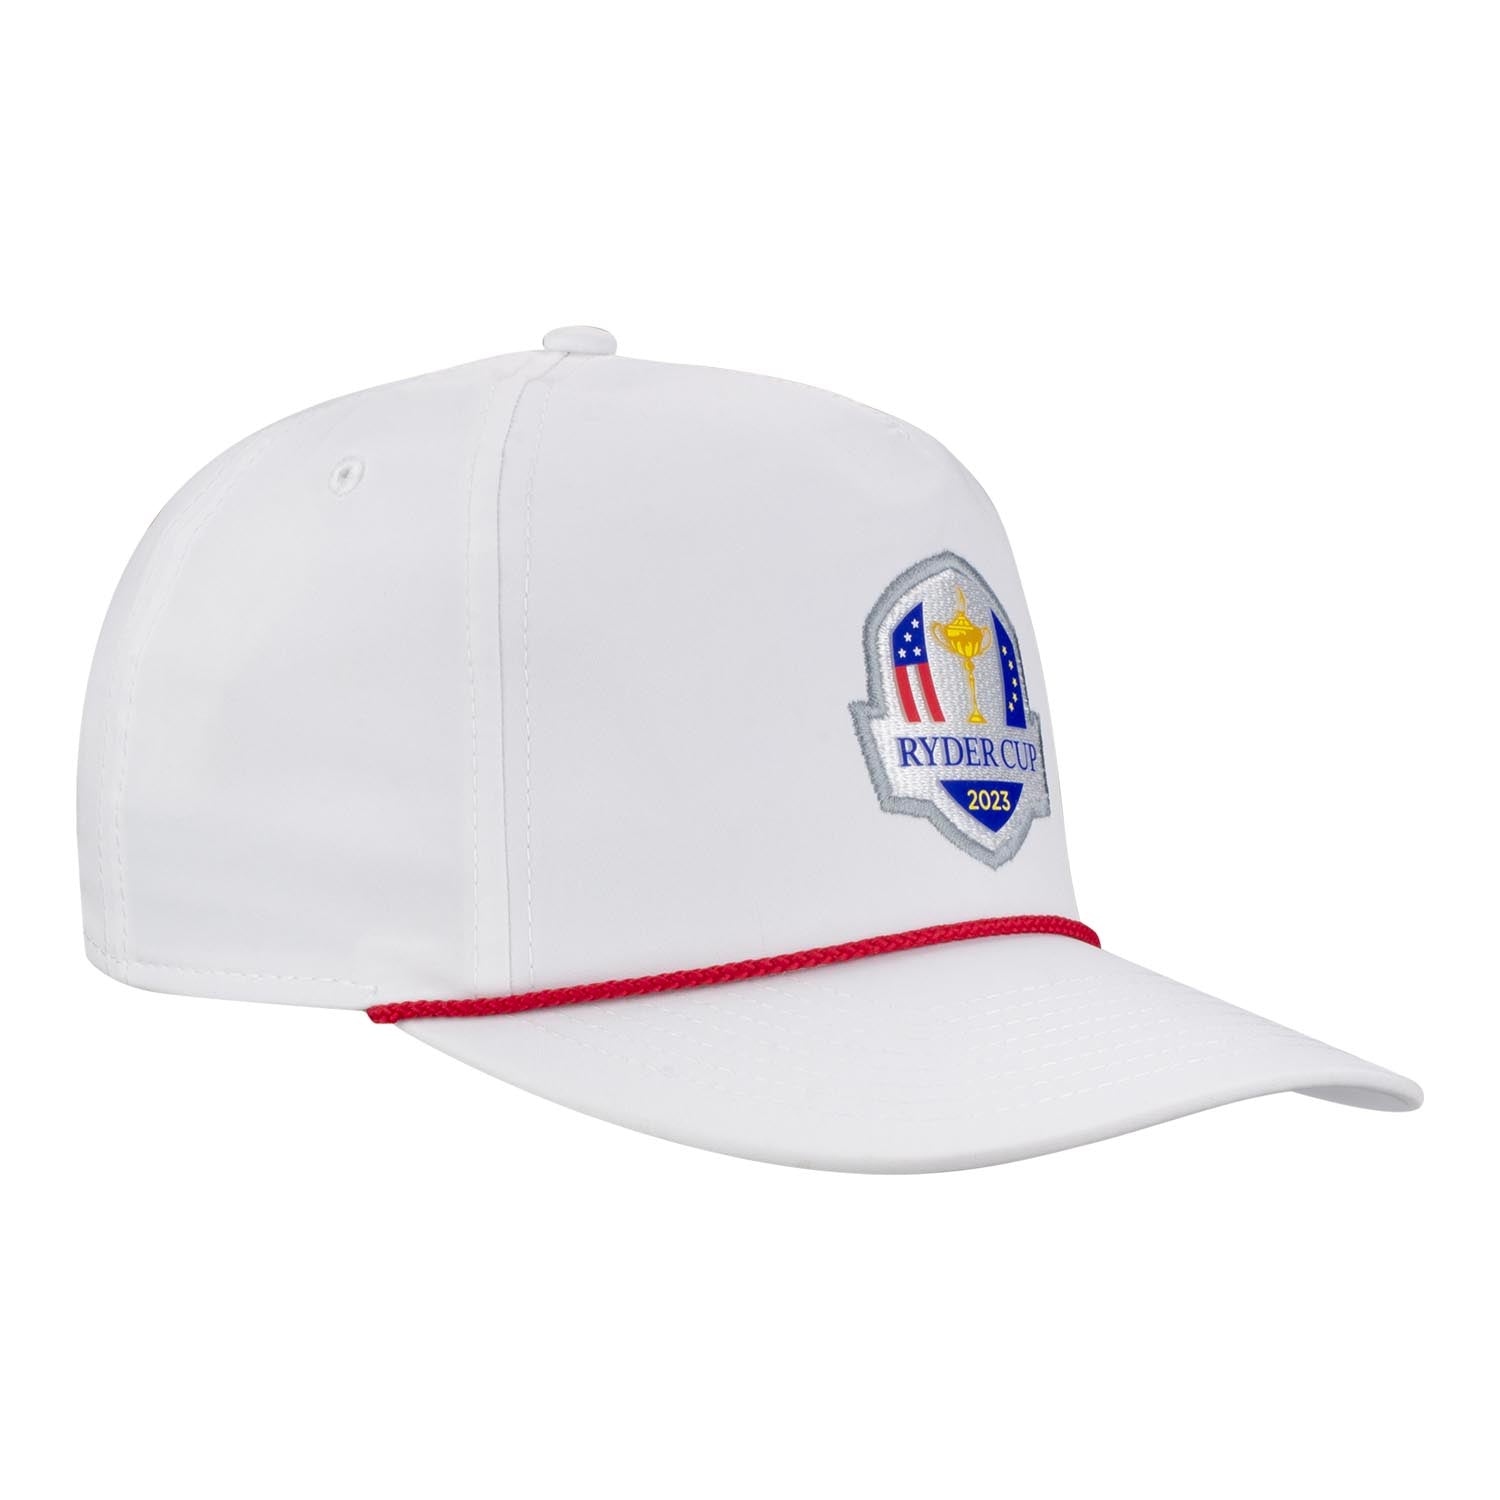 Imperial 2023 Ryder Cup The Wrightson Cap in White & Red Rope- Side View